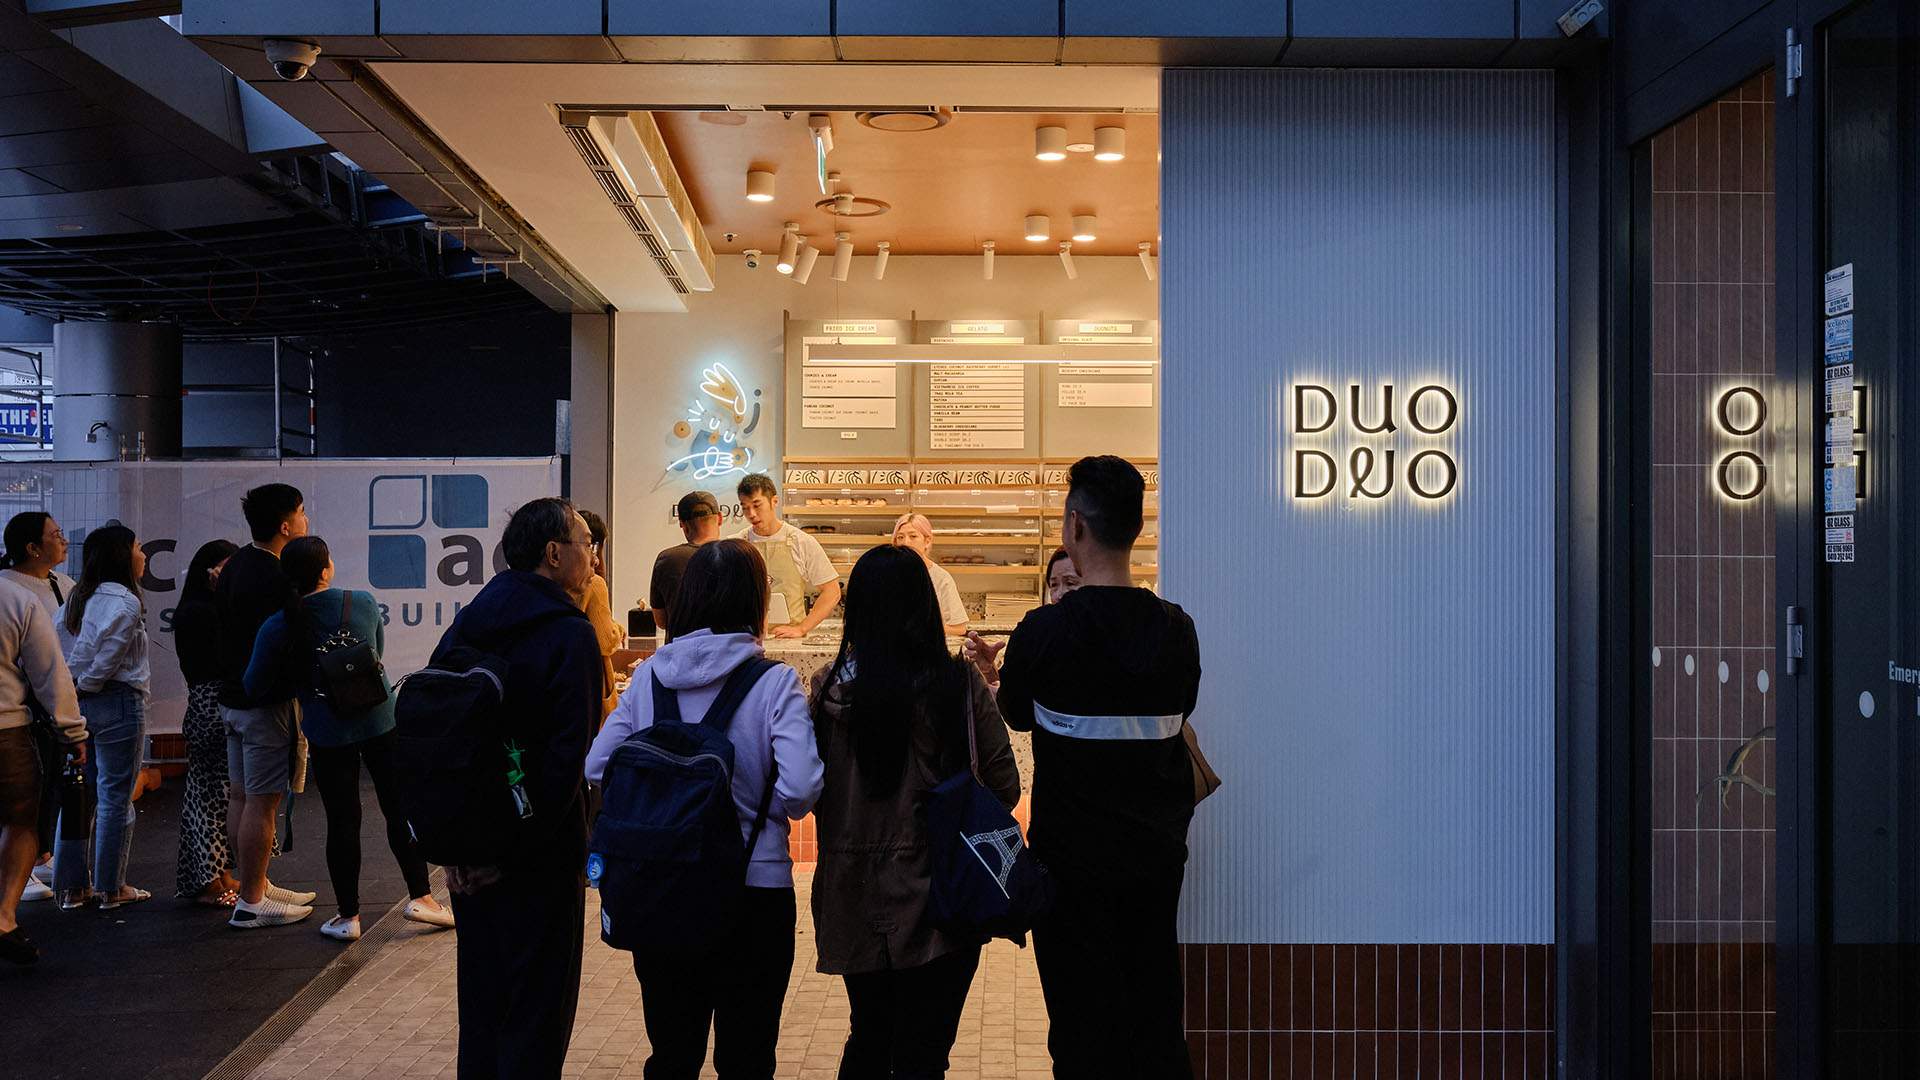 Deep Fried Ice Creamery Duo Duo Has Opened a Flagship Strathfield Store Filled with Nostalgic Desserts